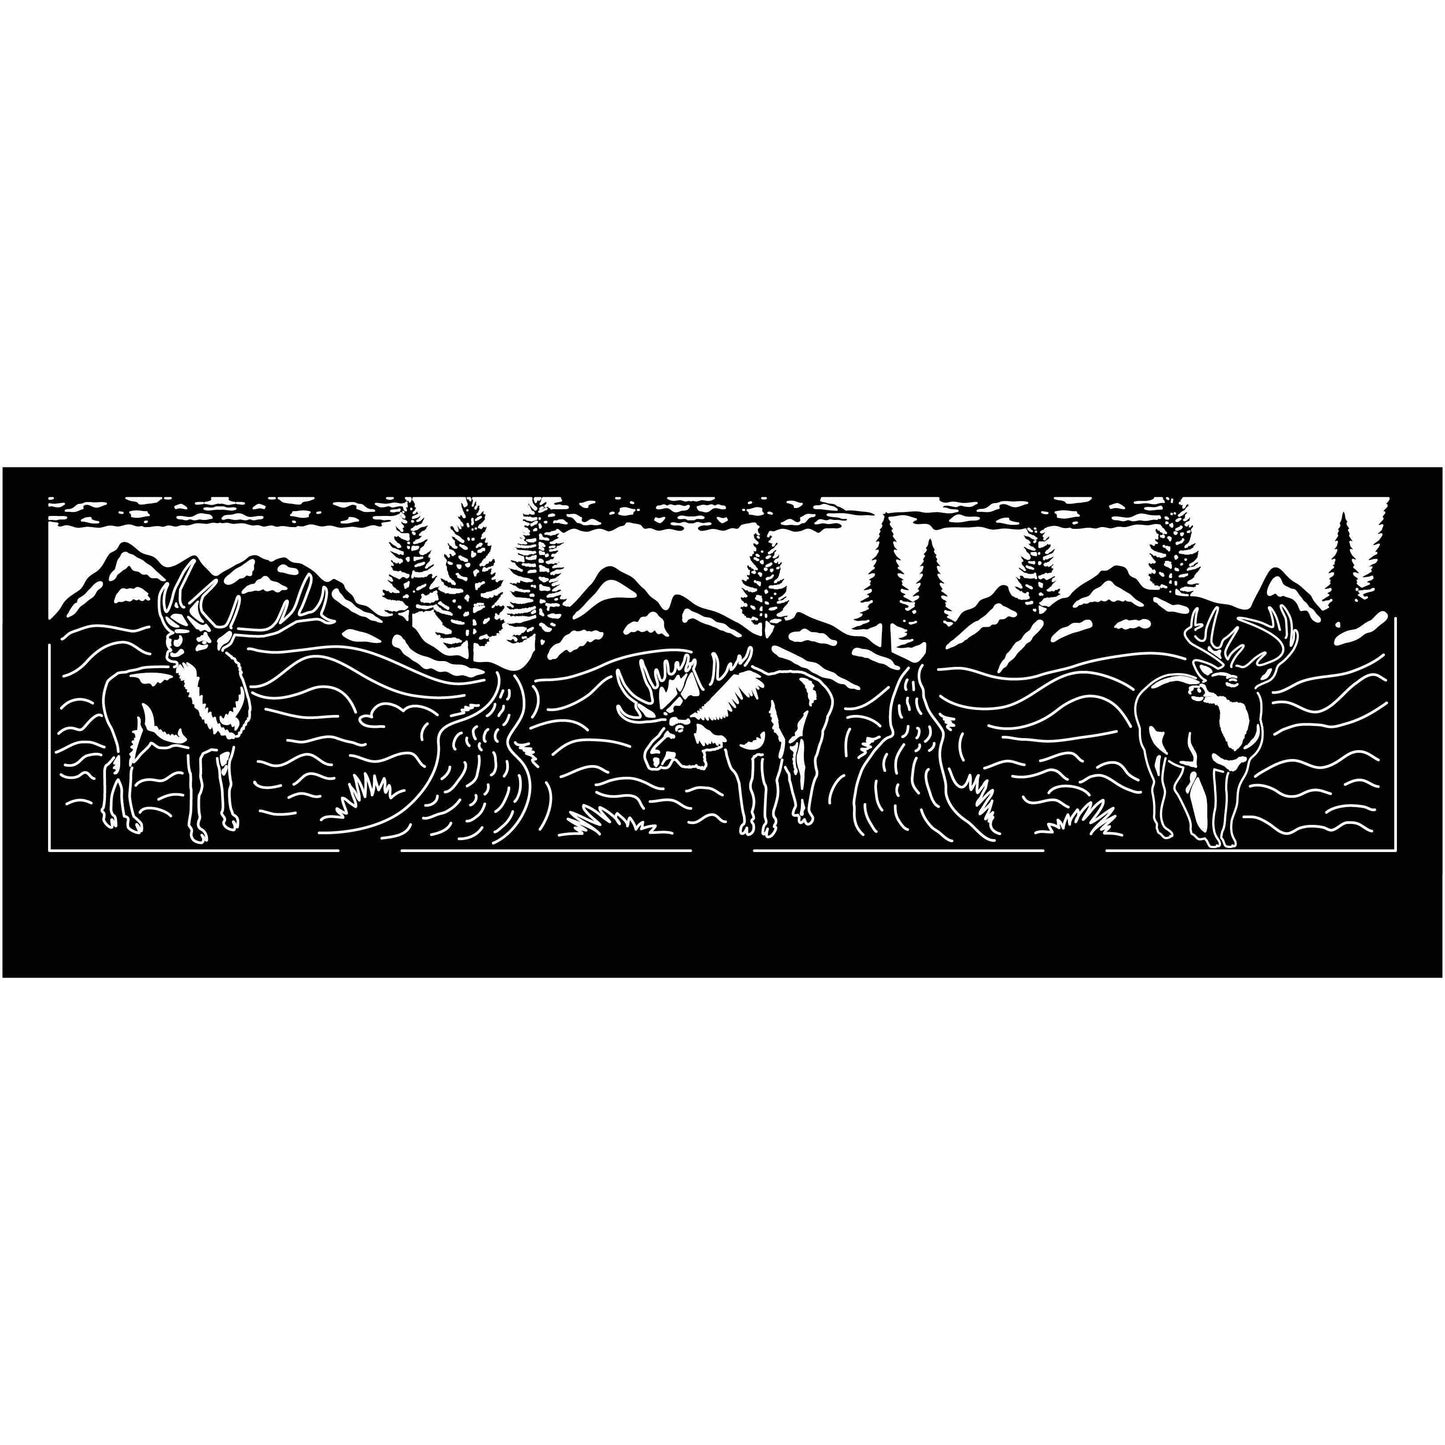 Fire Pit with Farm Scene LAYE-dxf files cut ready for cnc machines